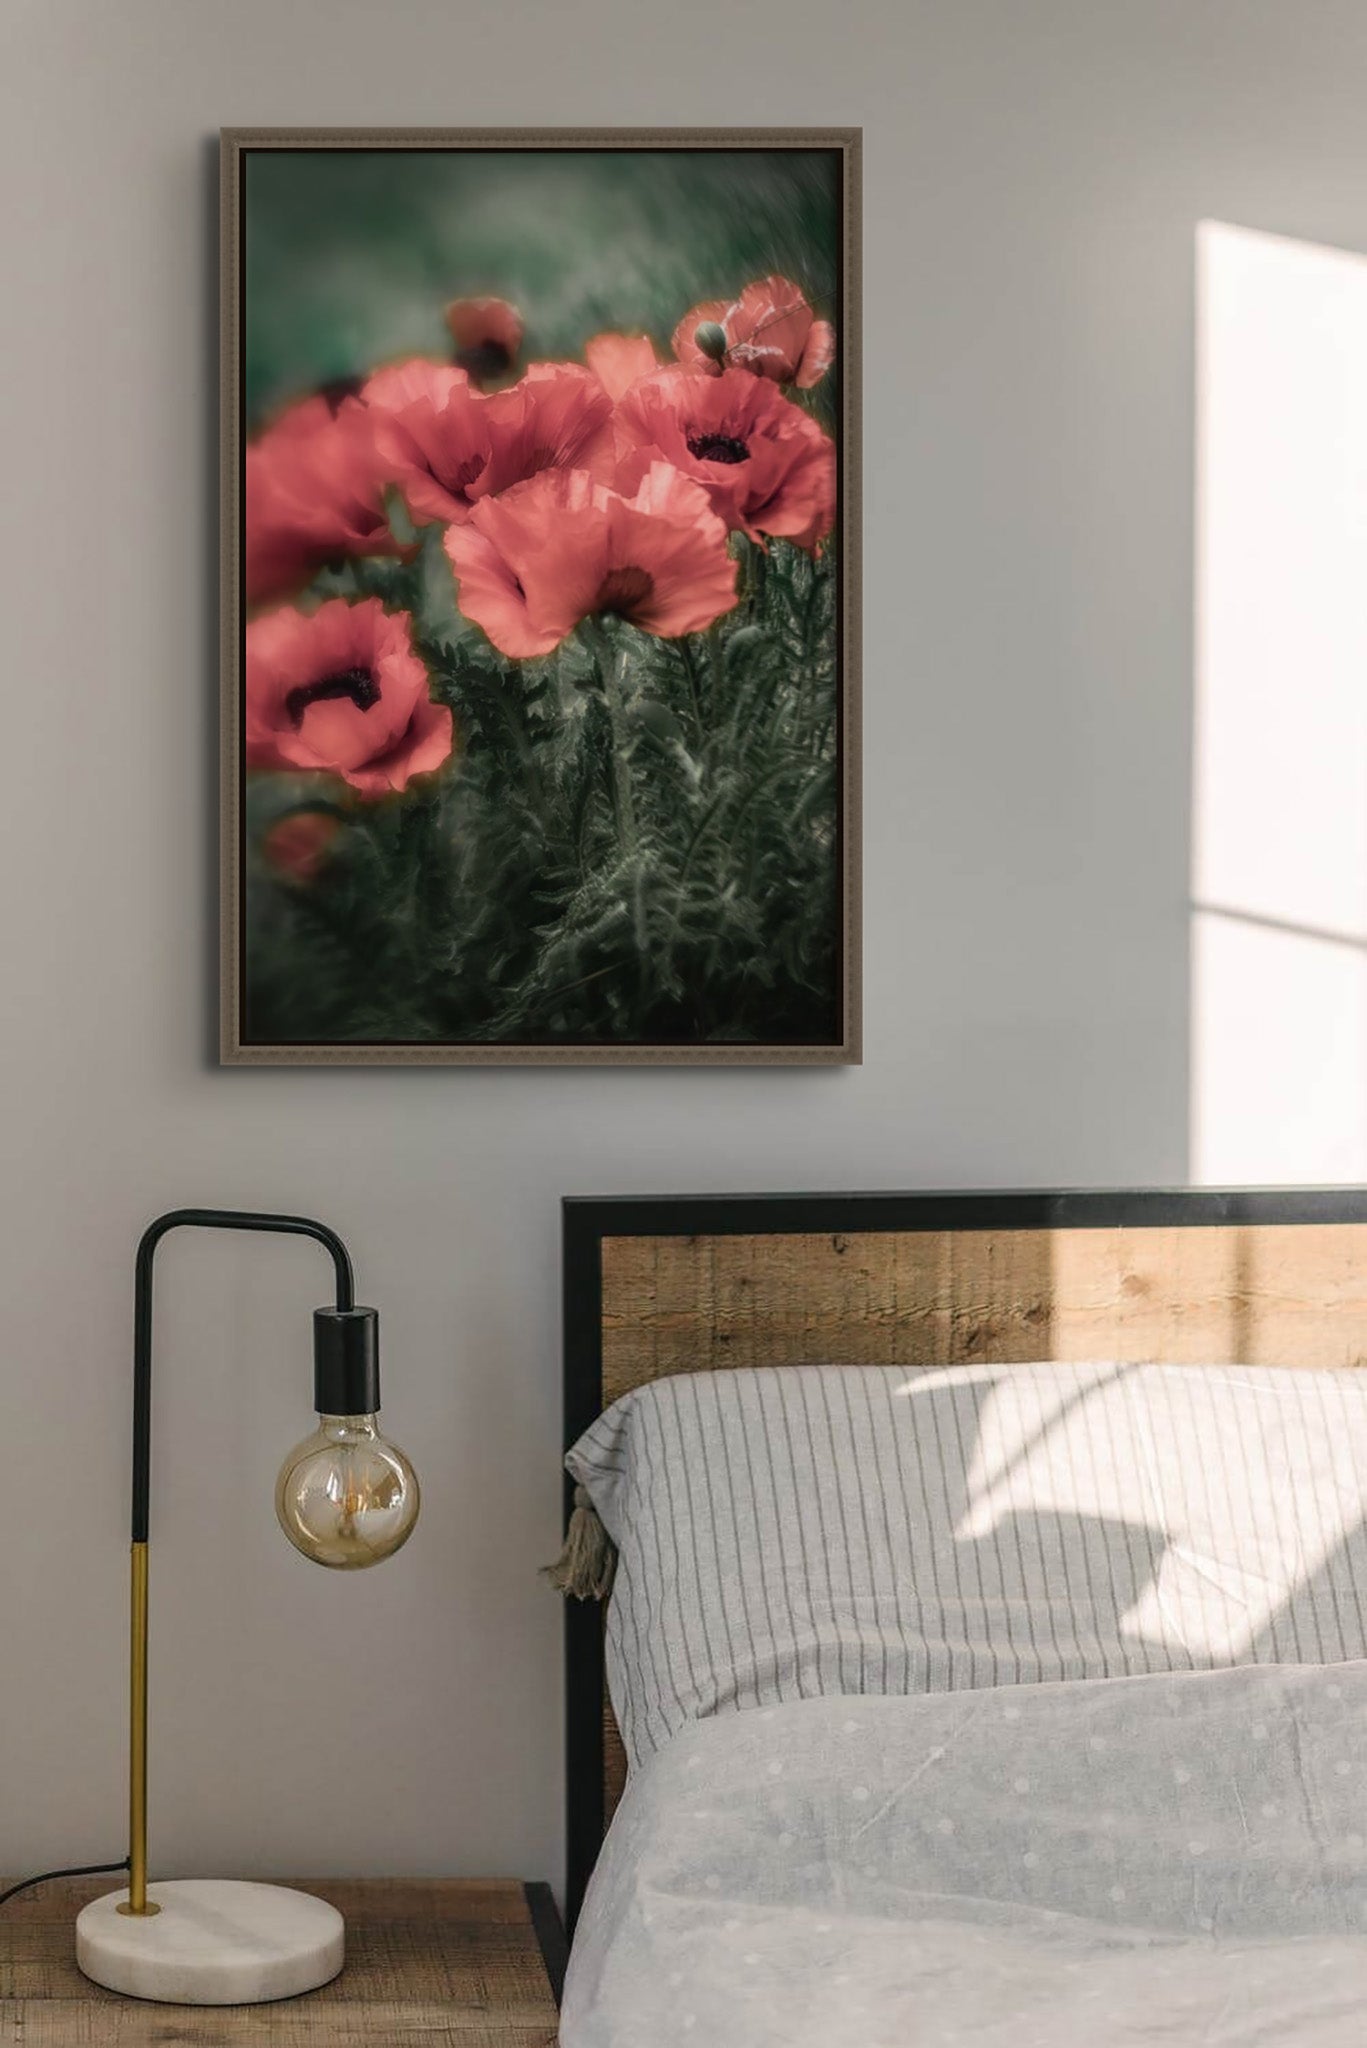 Picture in a floating frame hanging on the wall of a bedroom. The picture is a fine art photograph of red poppies on dark green stormy background by Cameron Dreaux. 